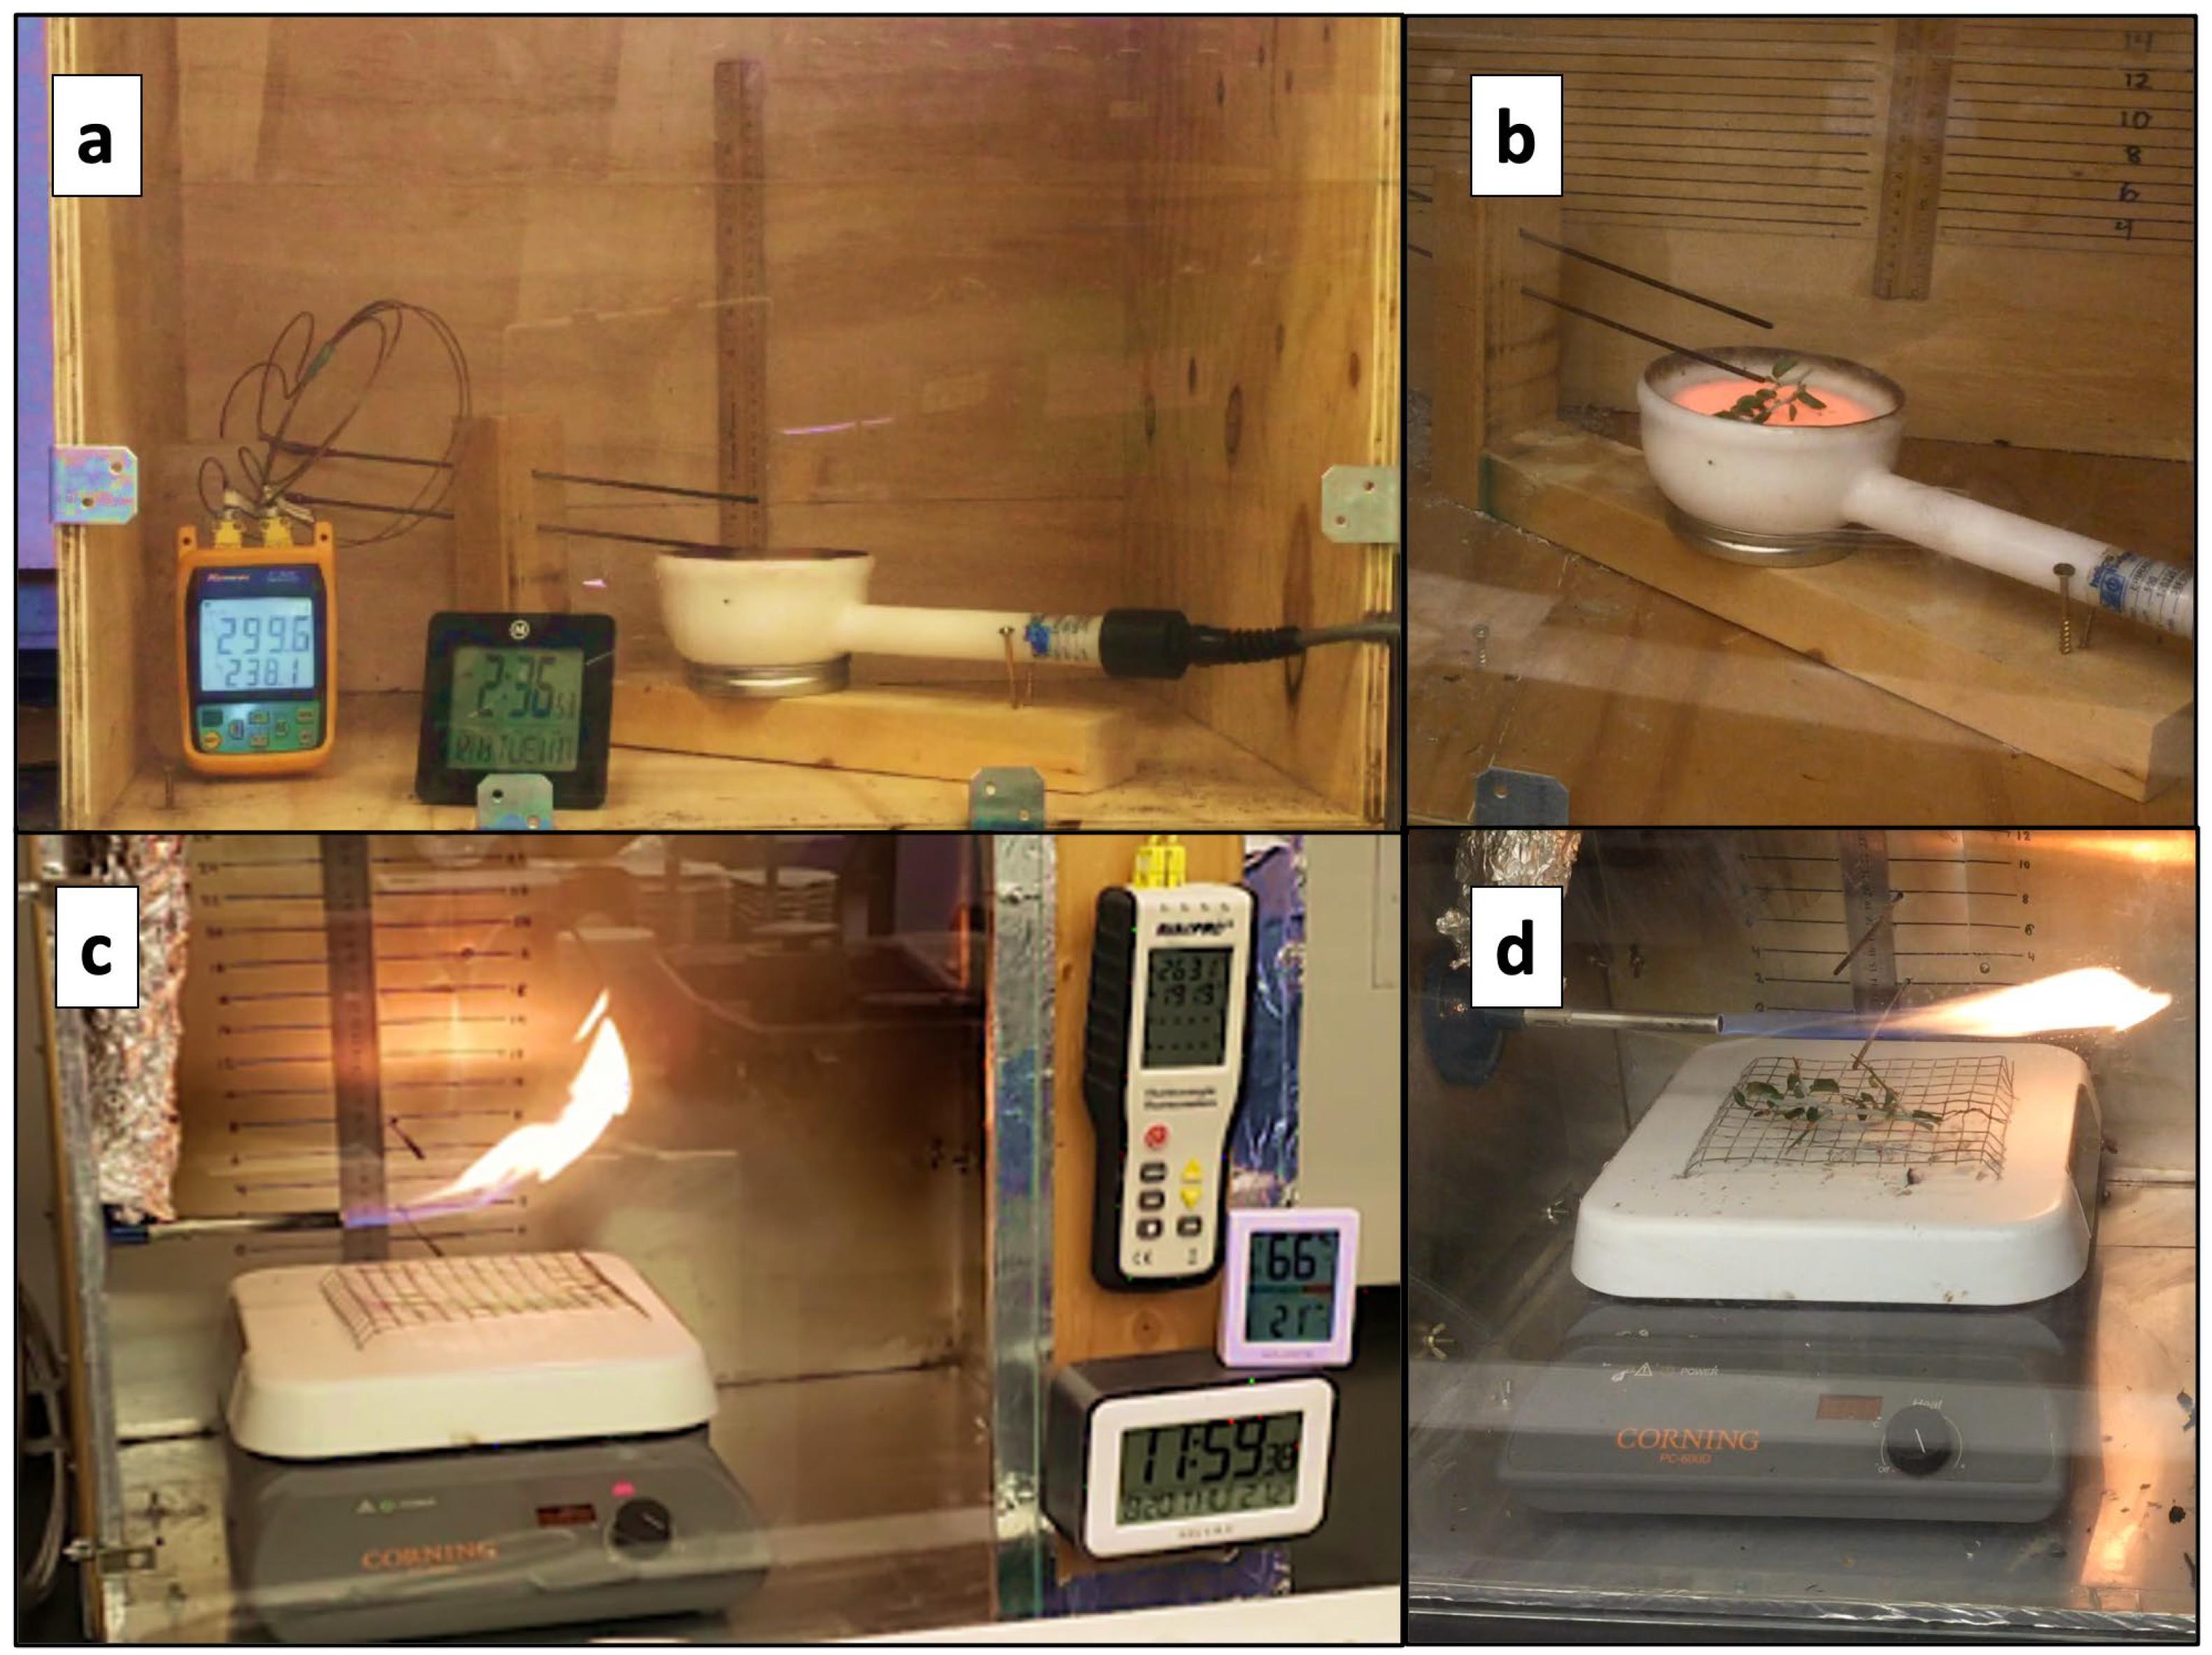 Hot Plate, Behavioral and Functional Neuroscience Laboratory